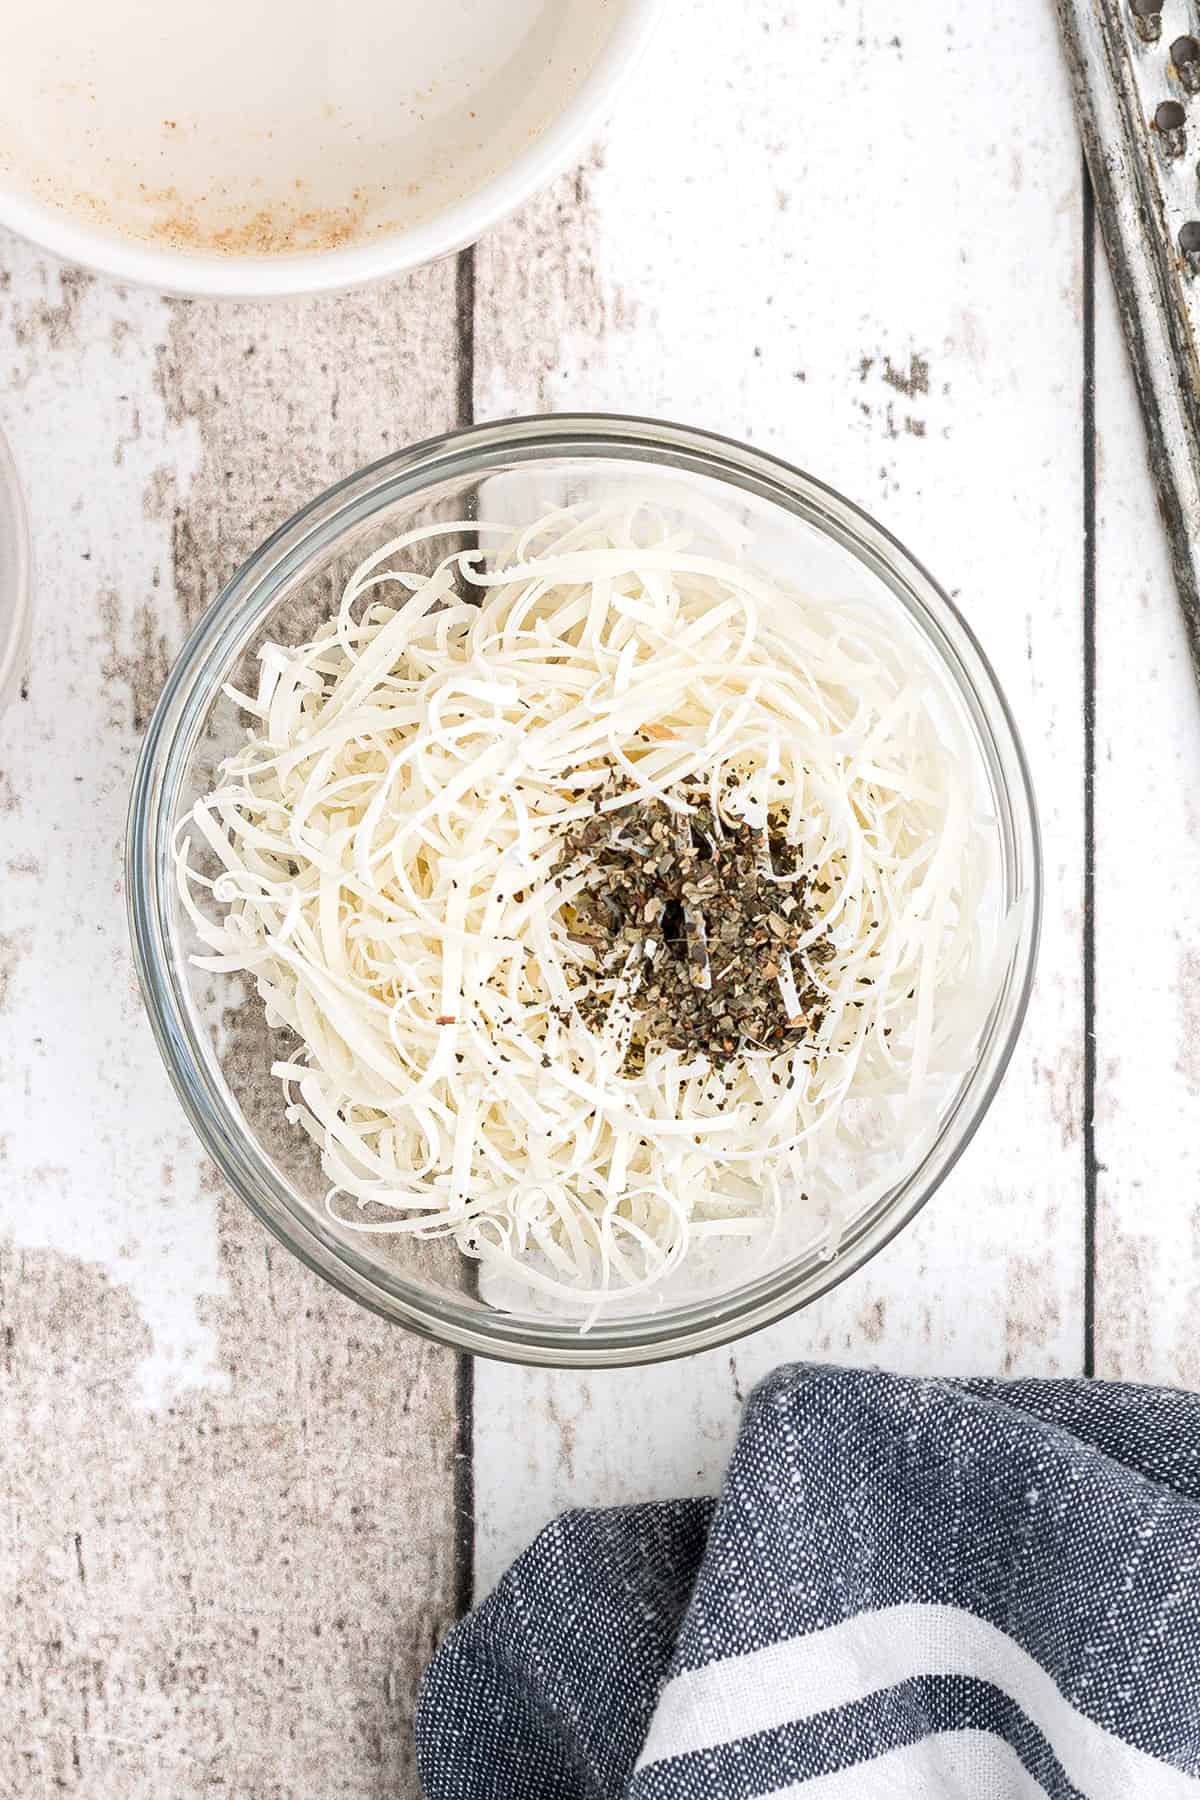 Parmesan cheese and dried basil in a bowl.